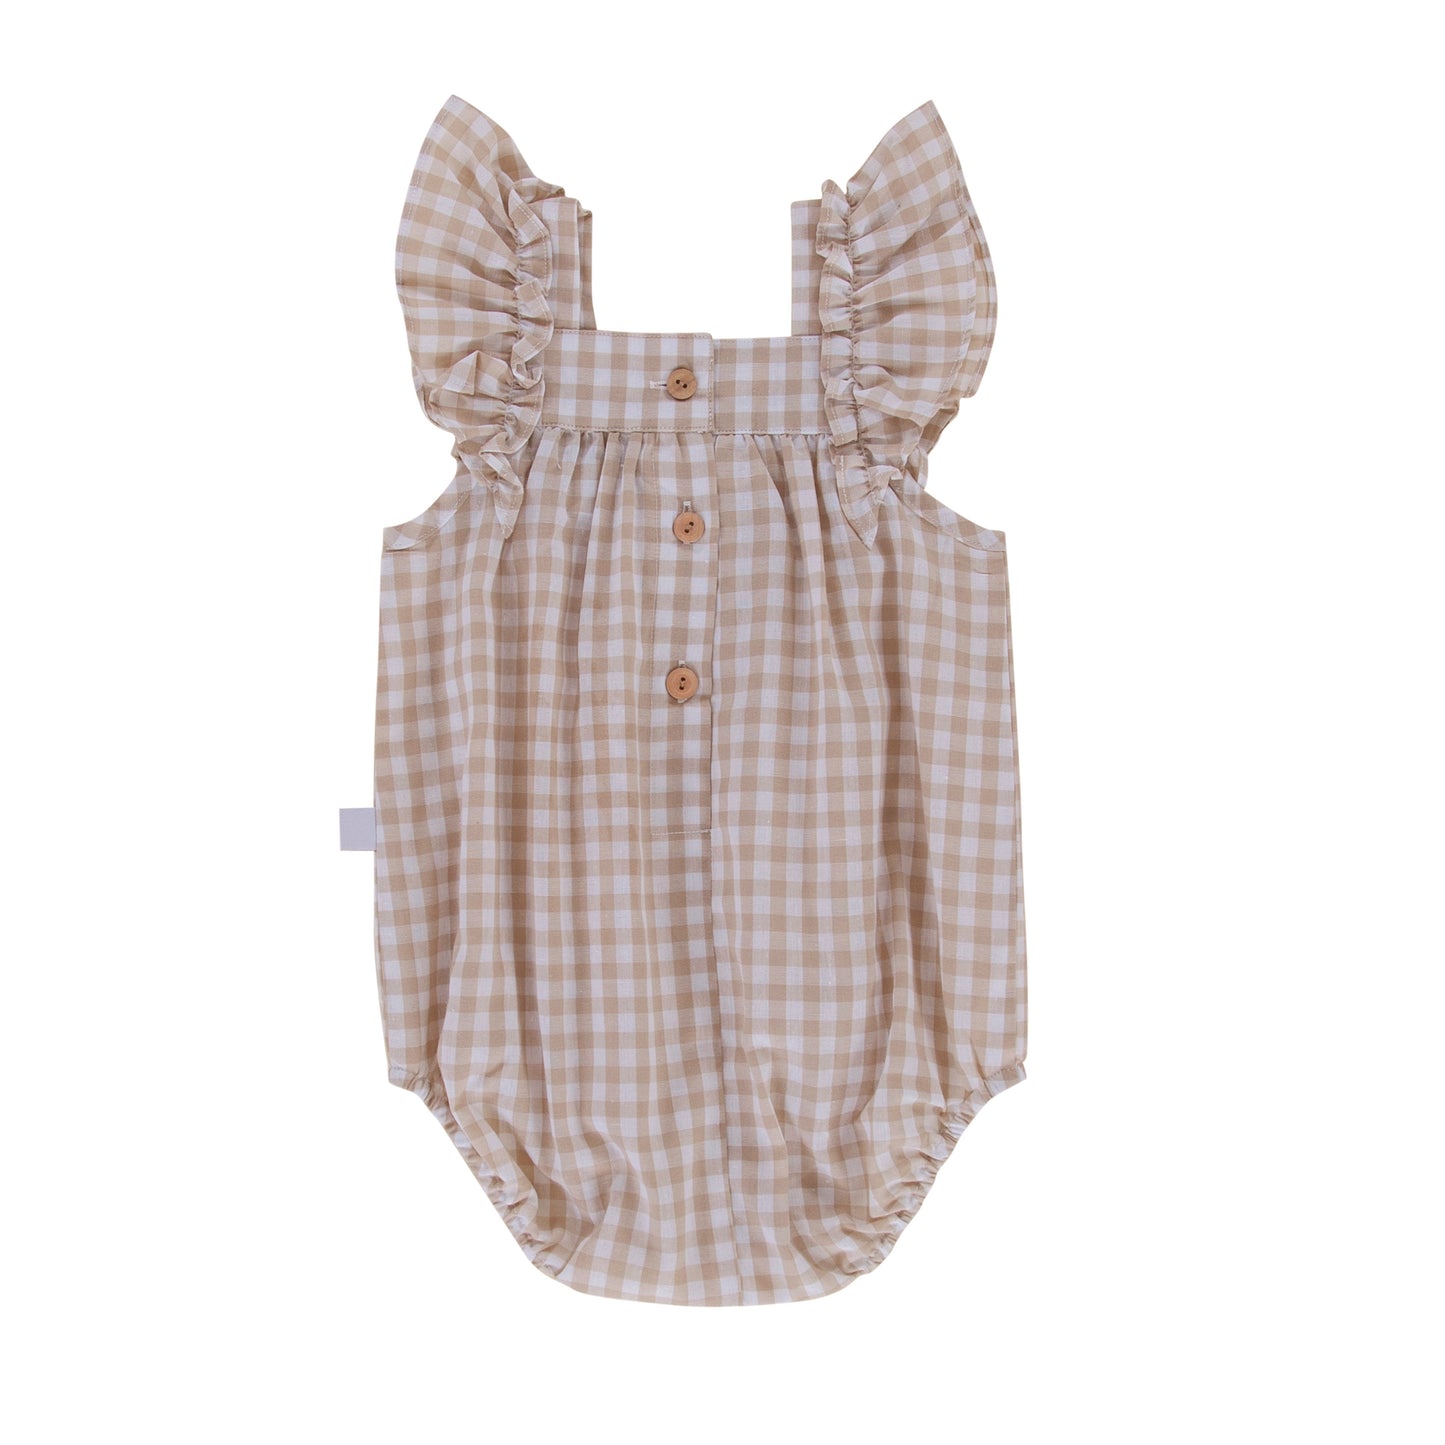 Roma Playsuit - Taupe Gingham